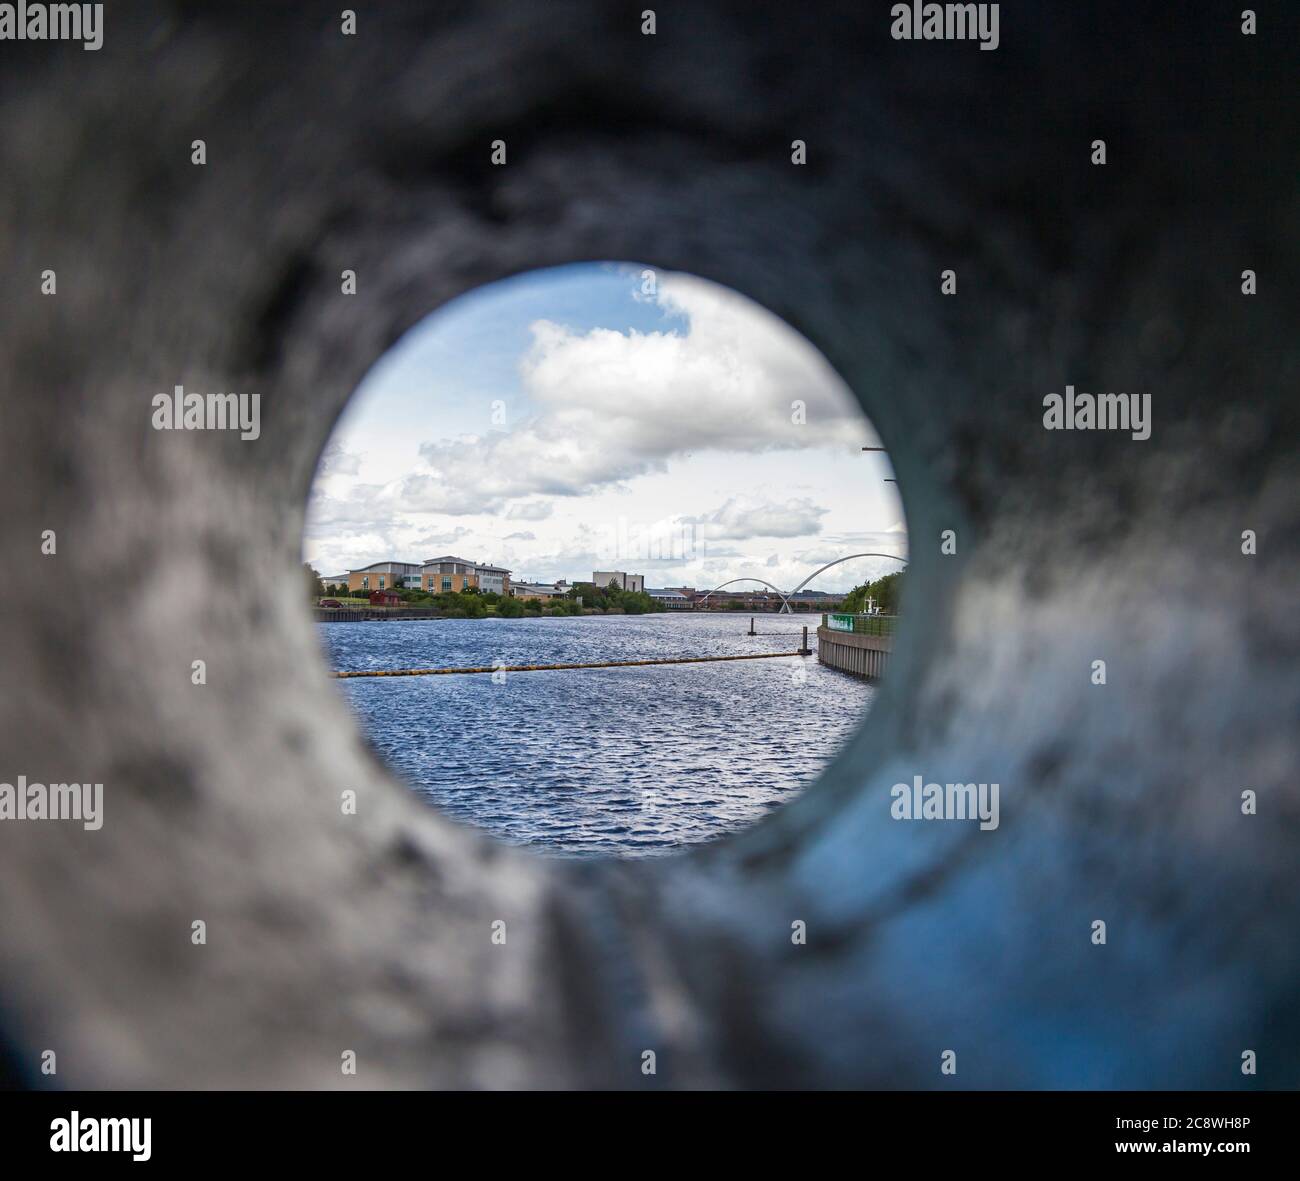 A view of the Infinity Bridge area from a cylindrical pipe at the Tees Barrage,Stockton on Tees,England UK Stock Photo